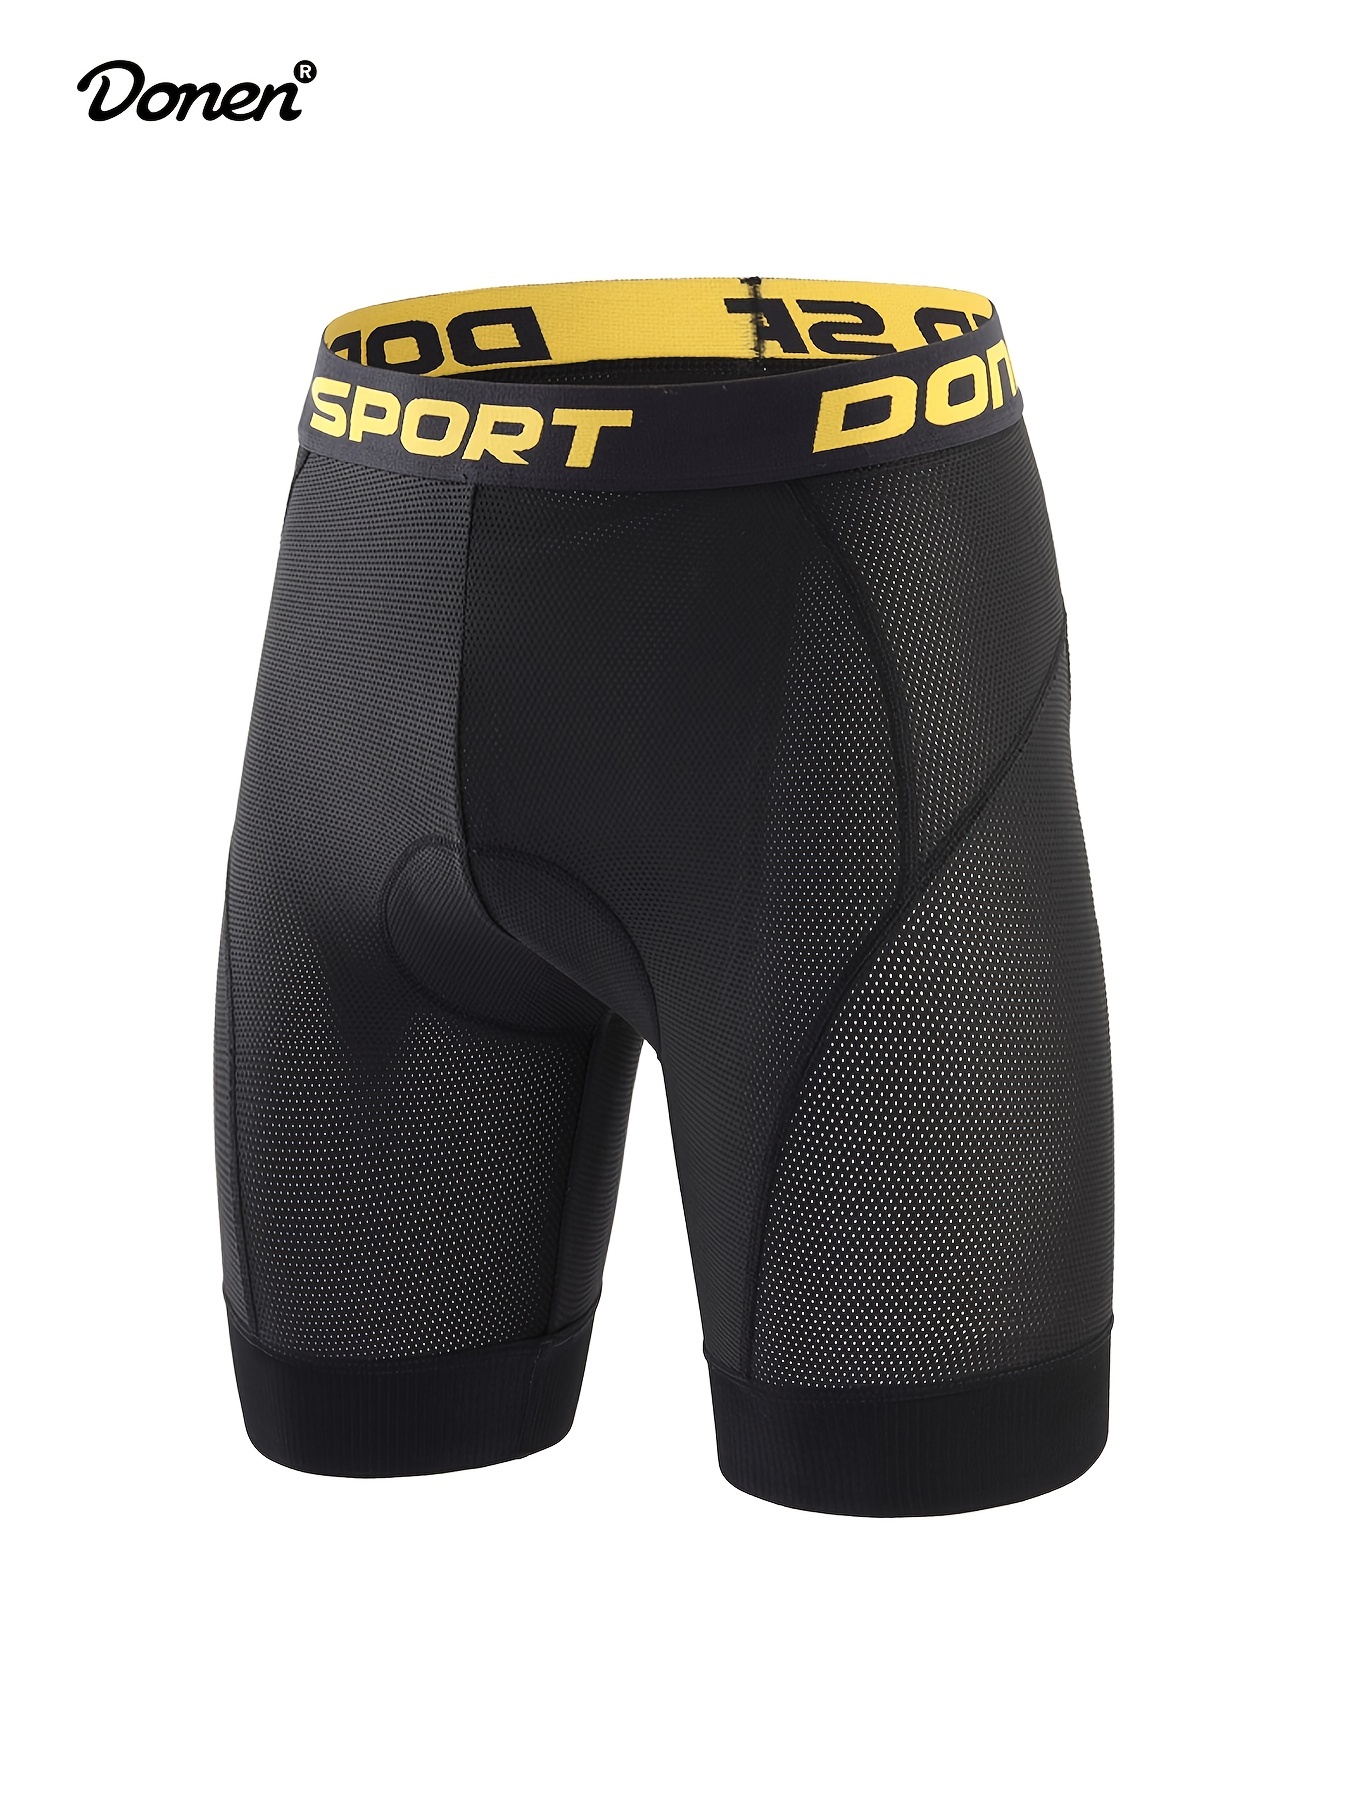 Men's Cycling Underwear, Cycling Boxers & Liners